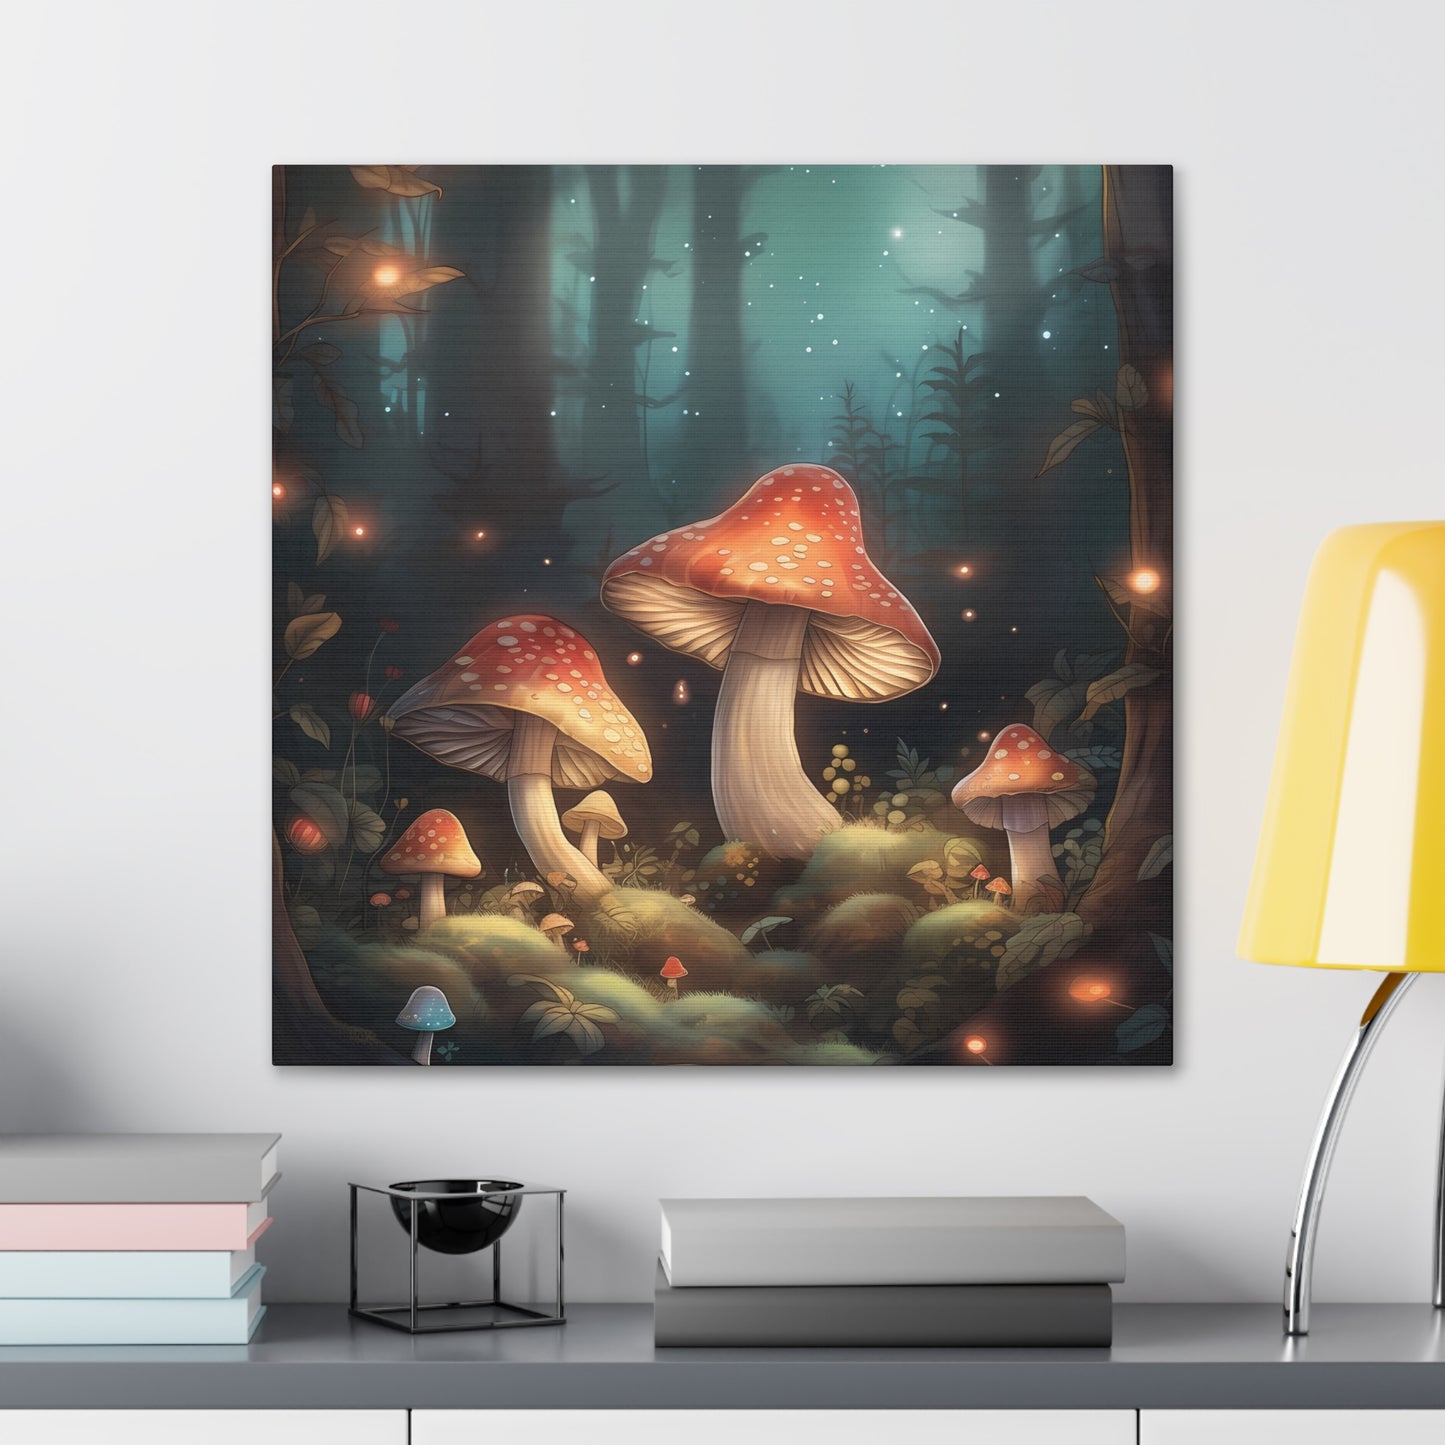 "Enchanted Glowing Mushrooms" Wall Art - Weave Got Gifts - Unique Gifts You Won’t Find Anywhere Else!